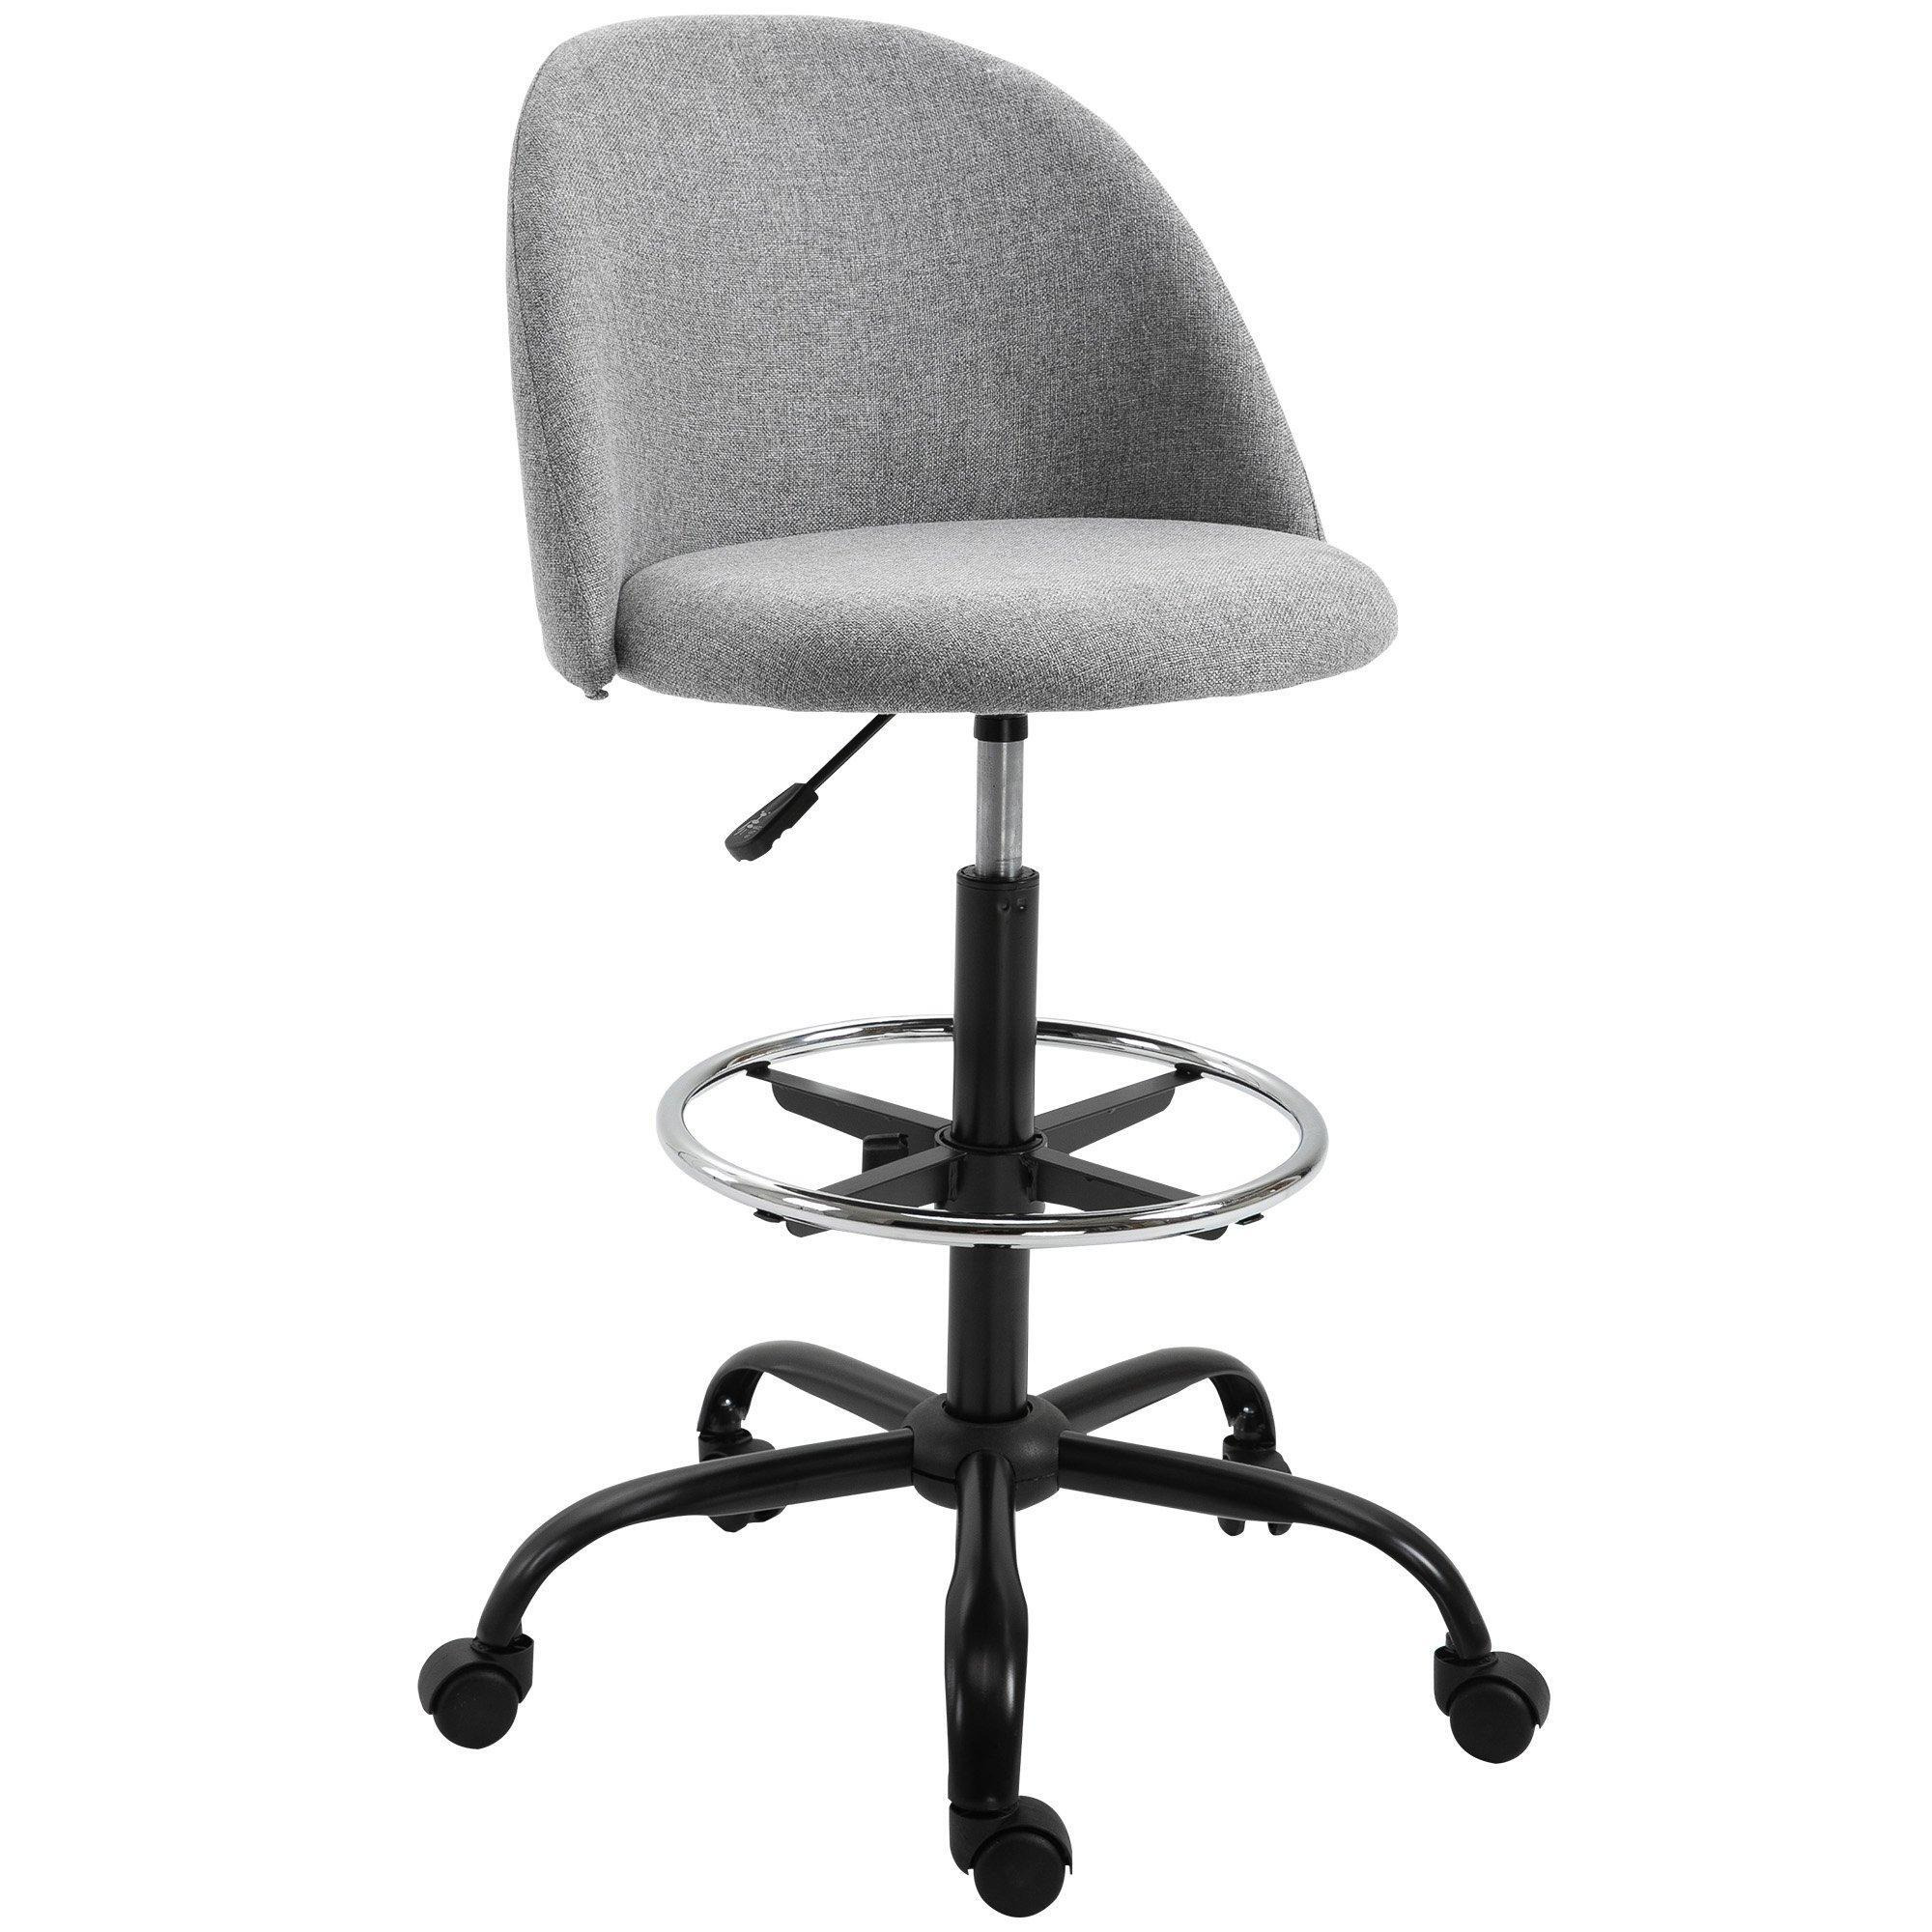 High Back Chair Home Office Seat Ergonomic with 5 Wheels Padded Grey - image 1